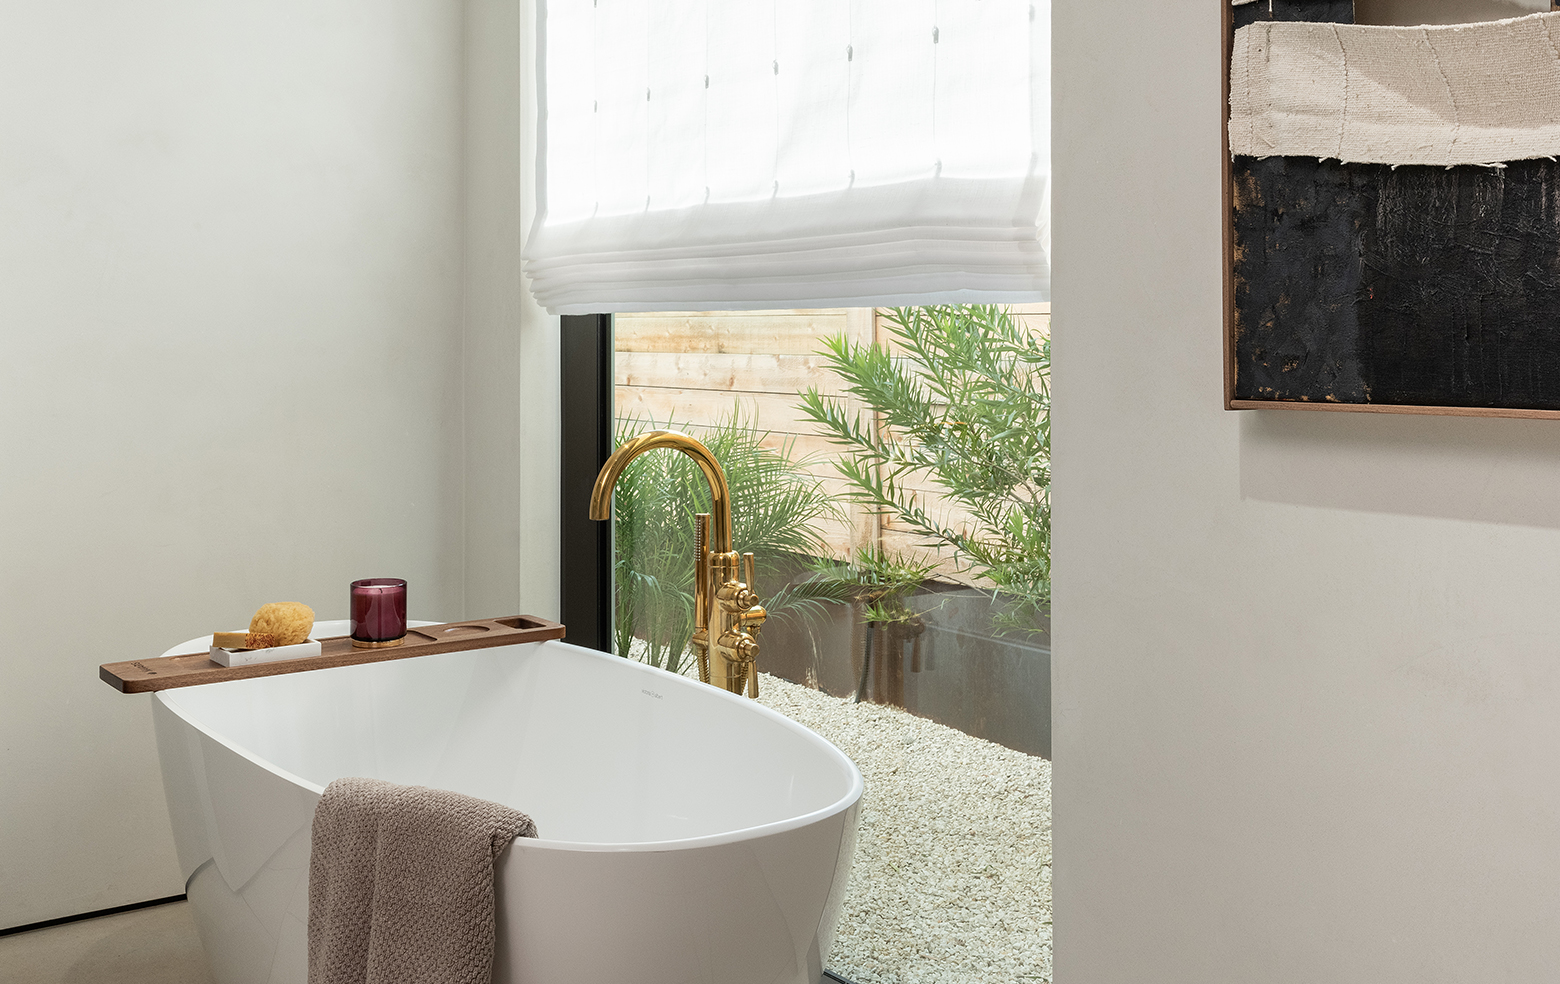 Light-filtering roman shades over a serene bath full of natural light in the daytime